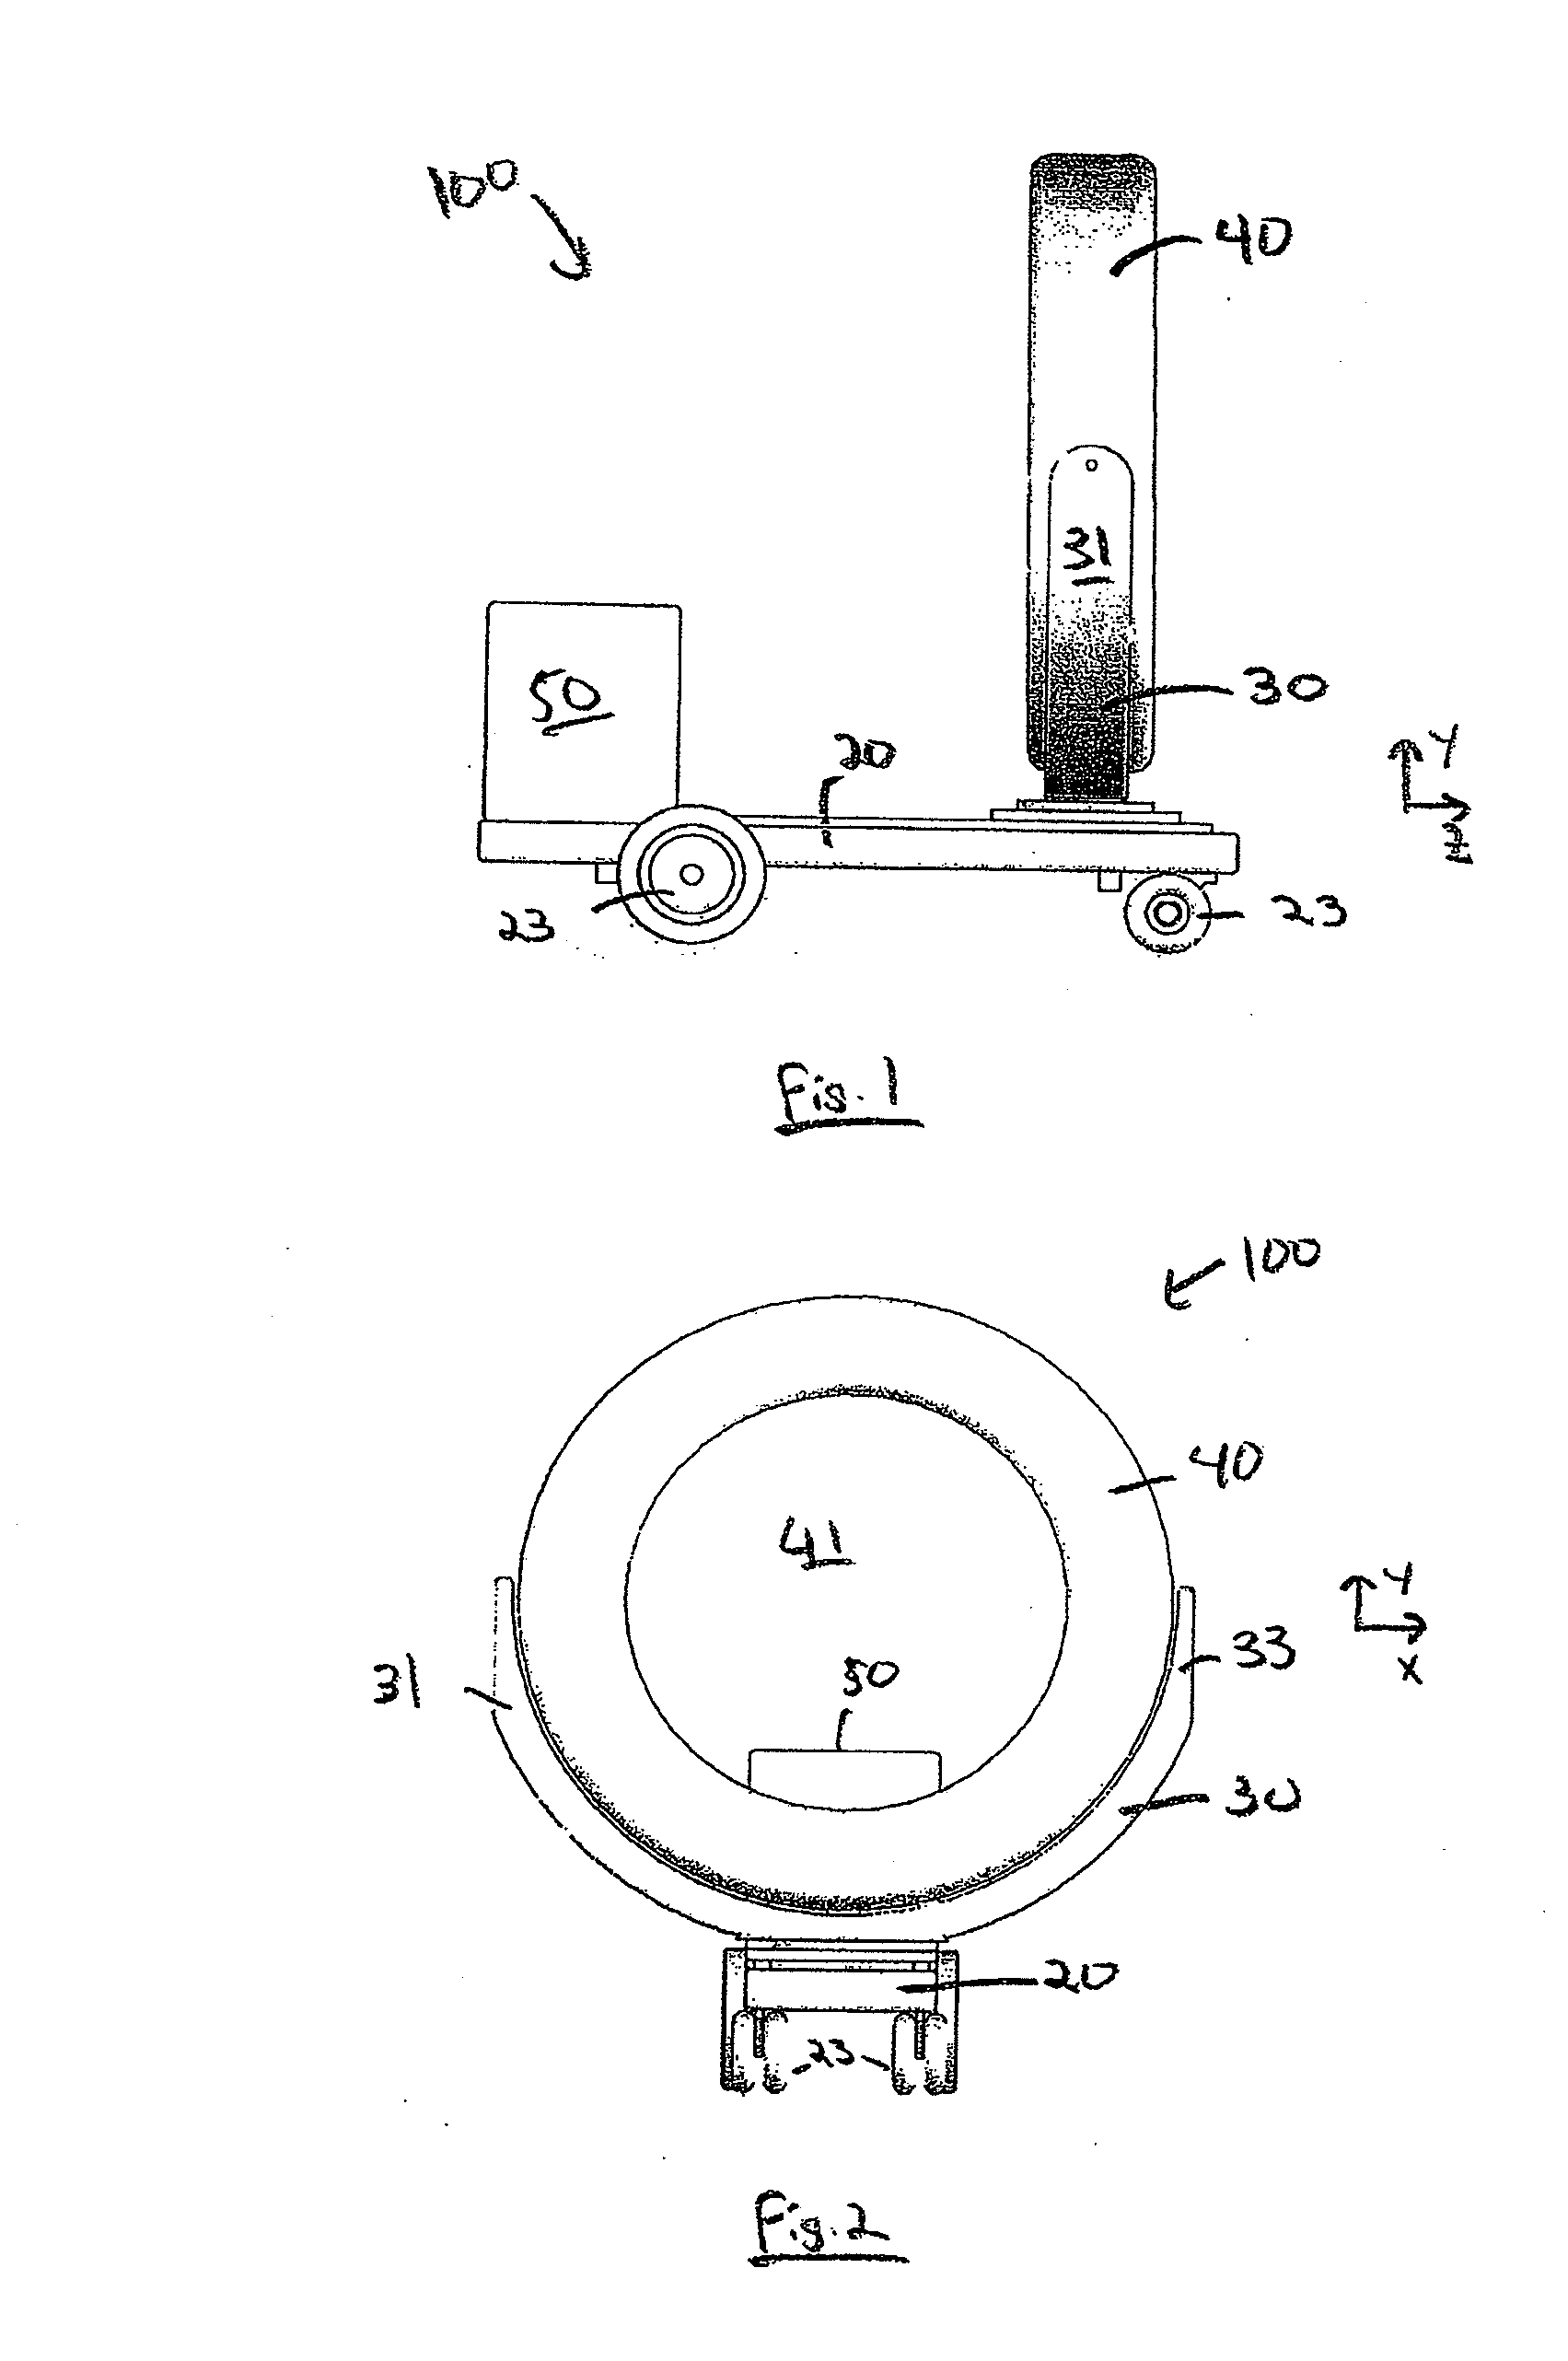 Mobile medical imaging system and methods